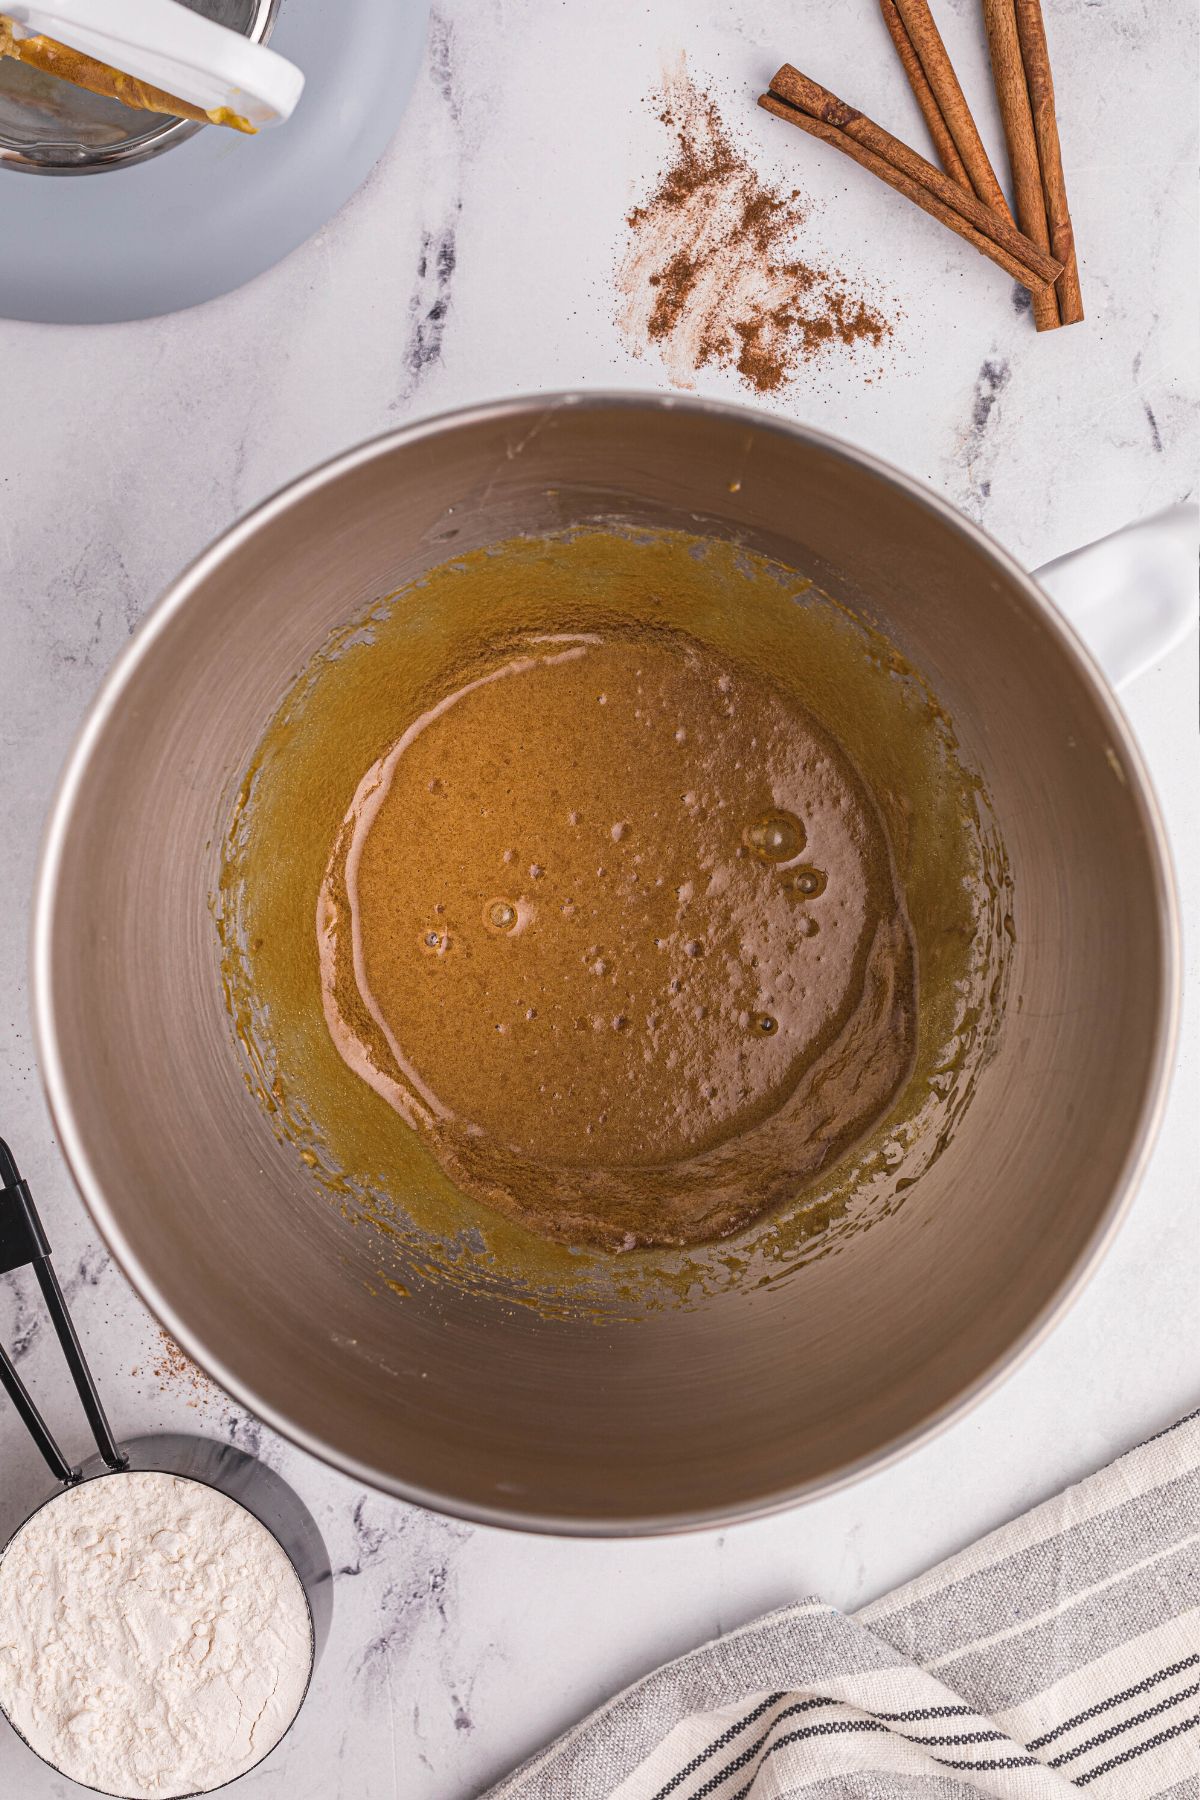 Gingersnap dough being mixed together in a silver mixing bowl